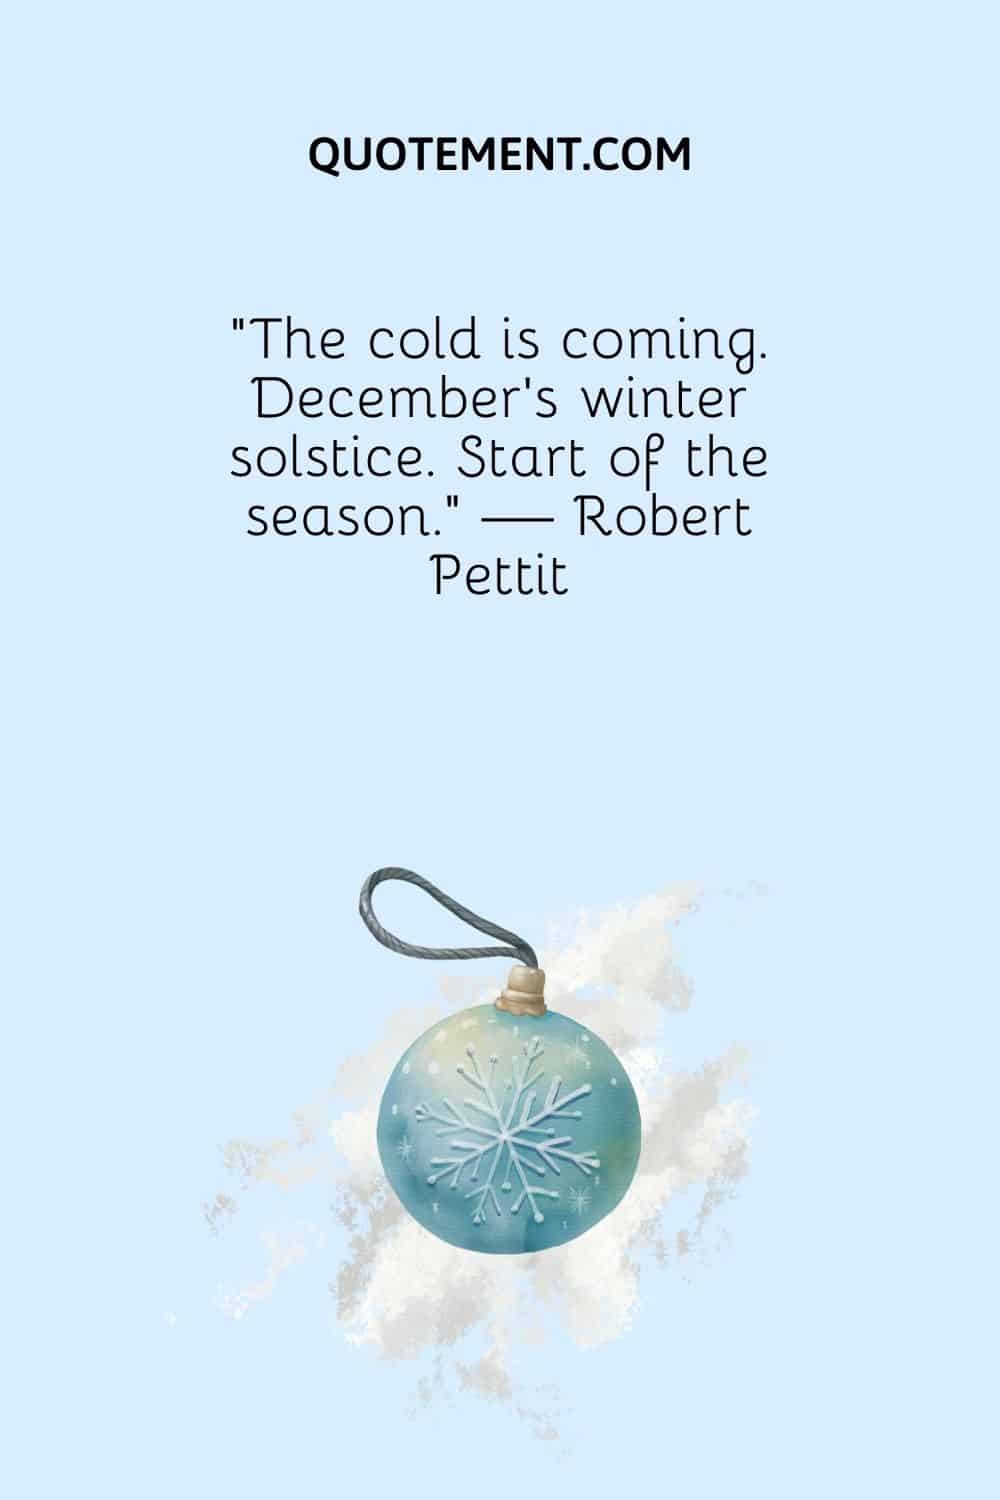 The cold is coming. December's winter solstice. Start of the season. — Robert Pettit